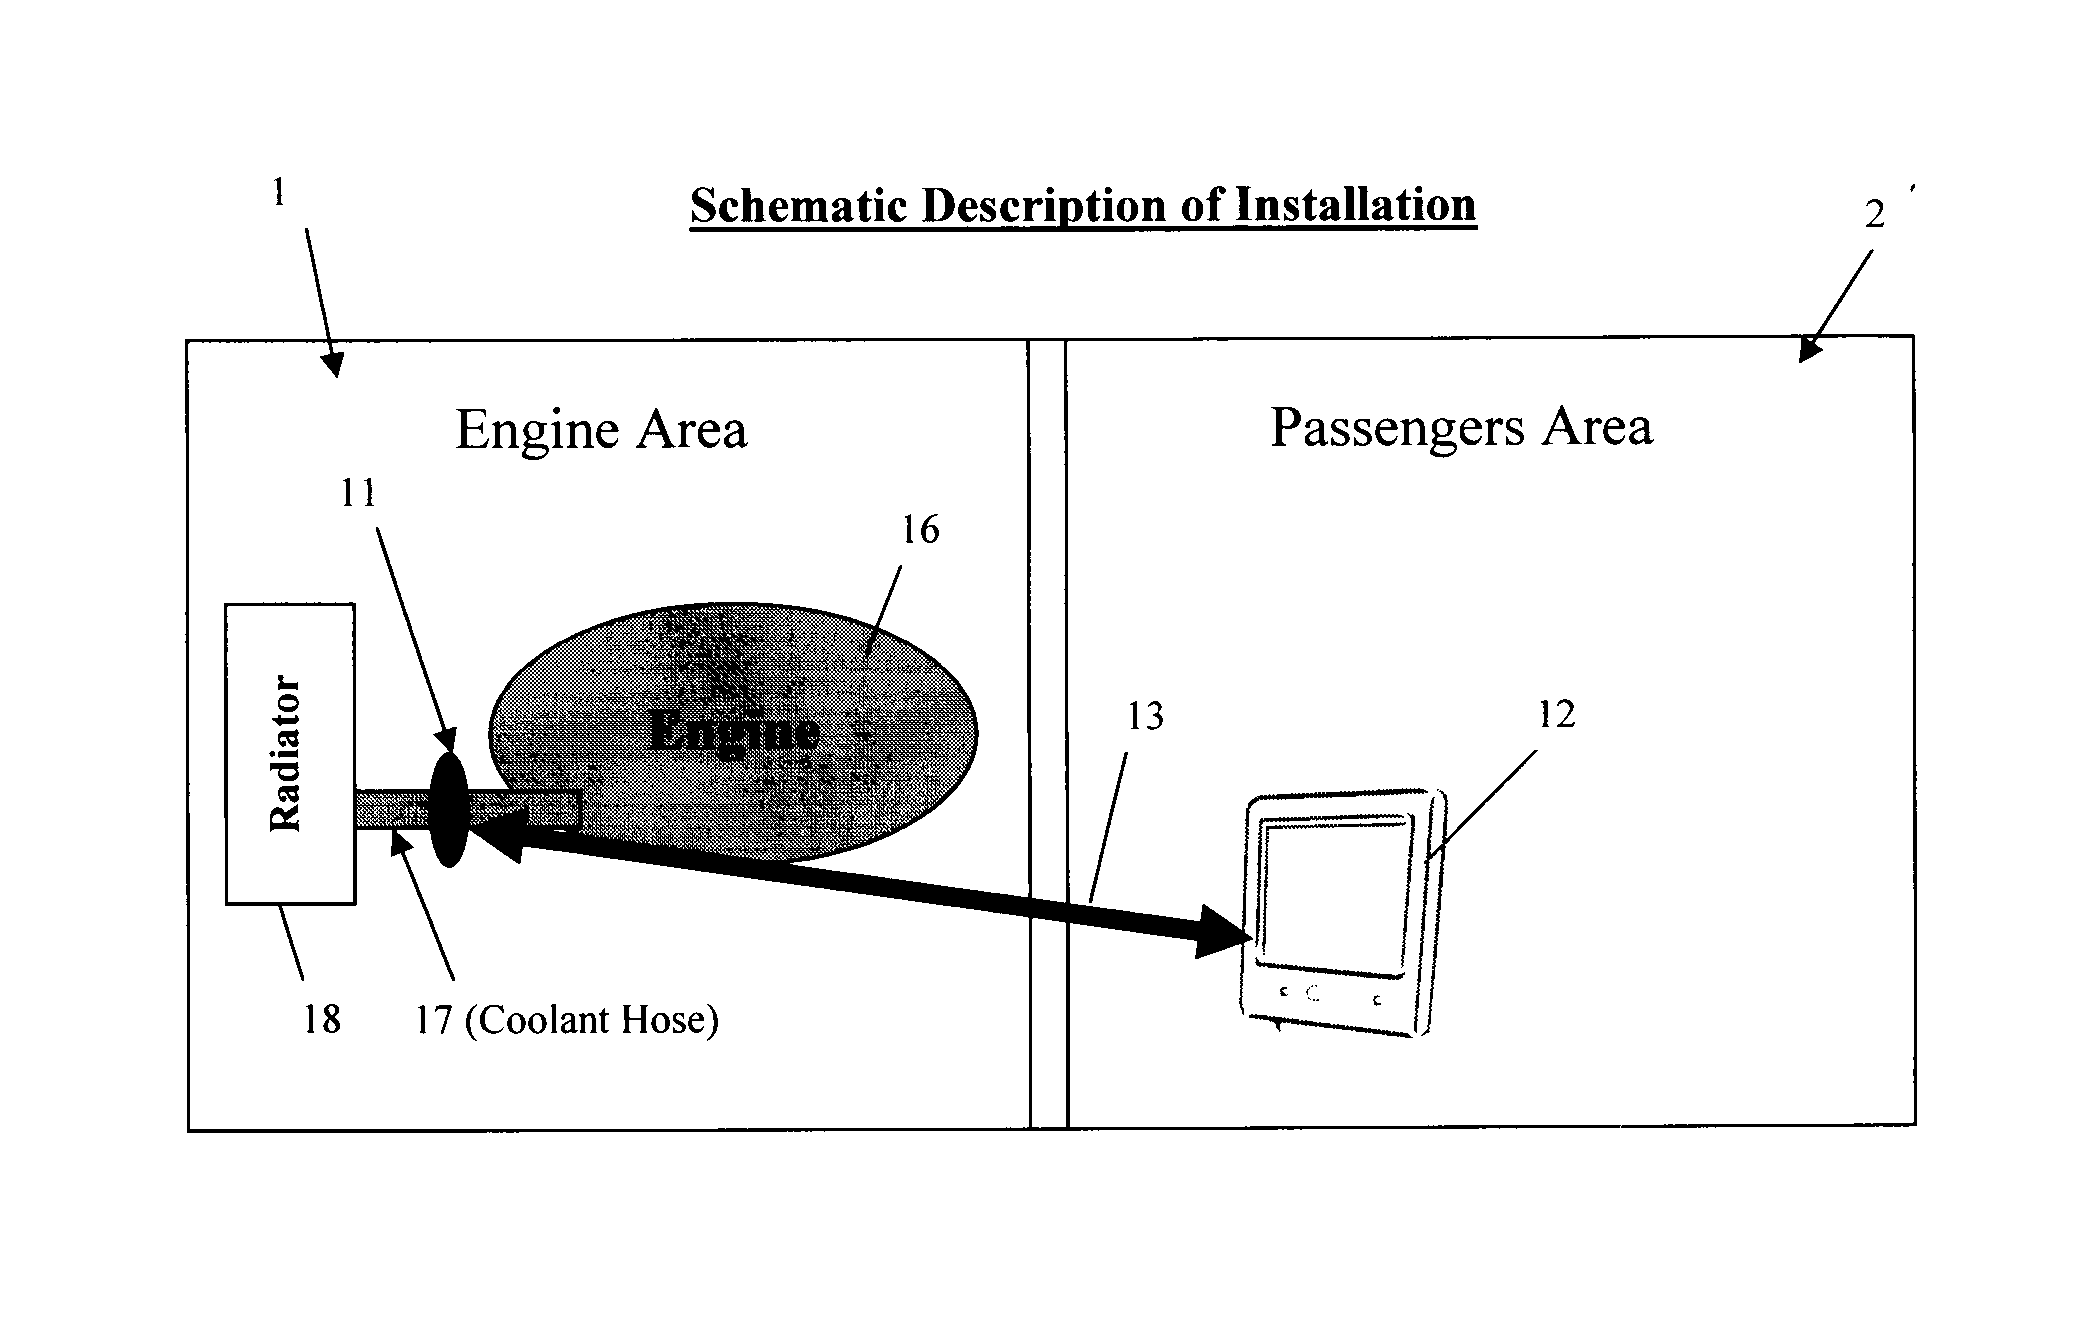 System for monitoring the coolant level and the temperature of an internal combustion engine